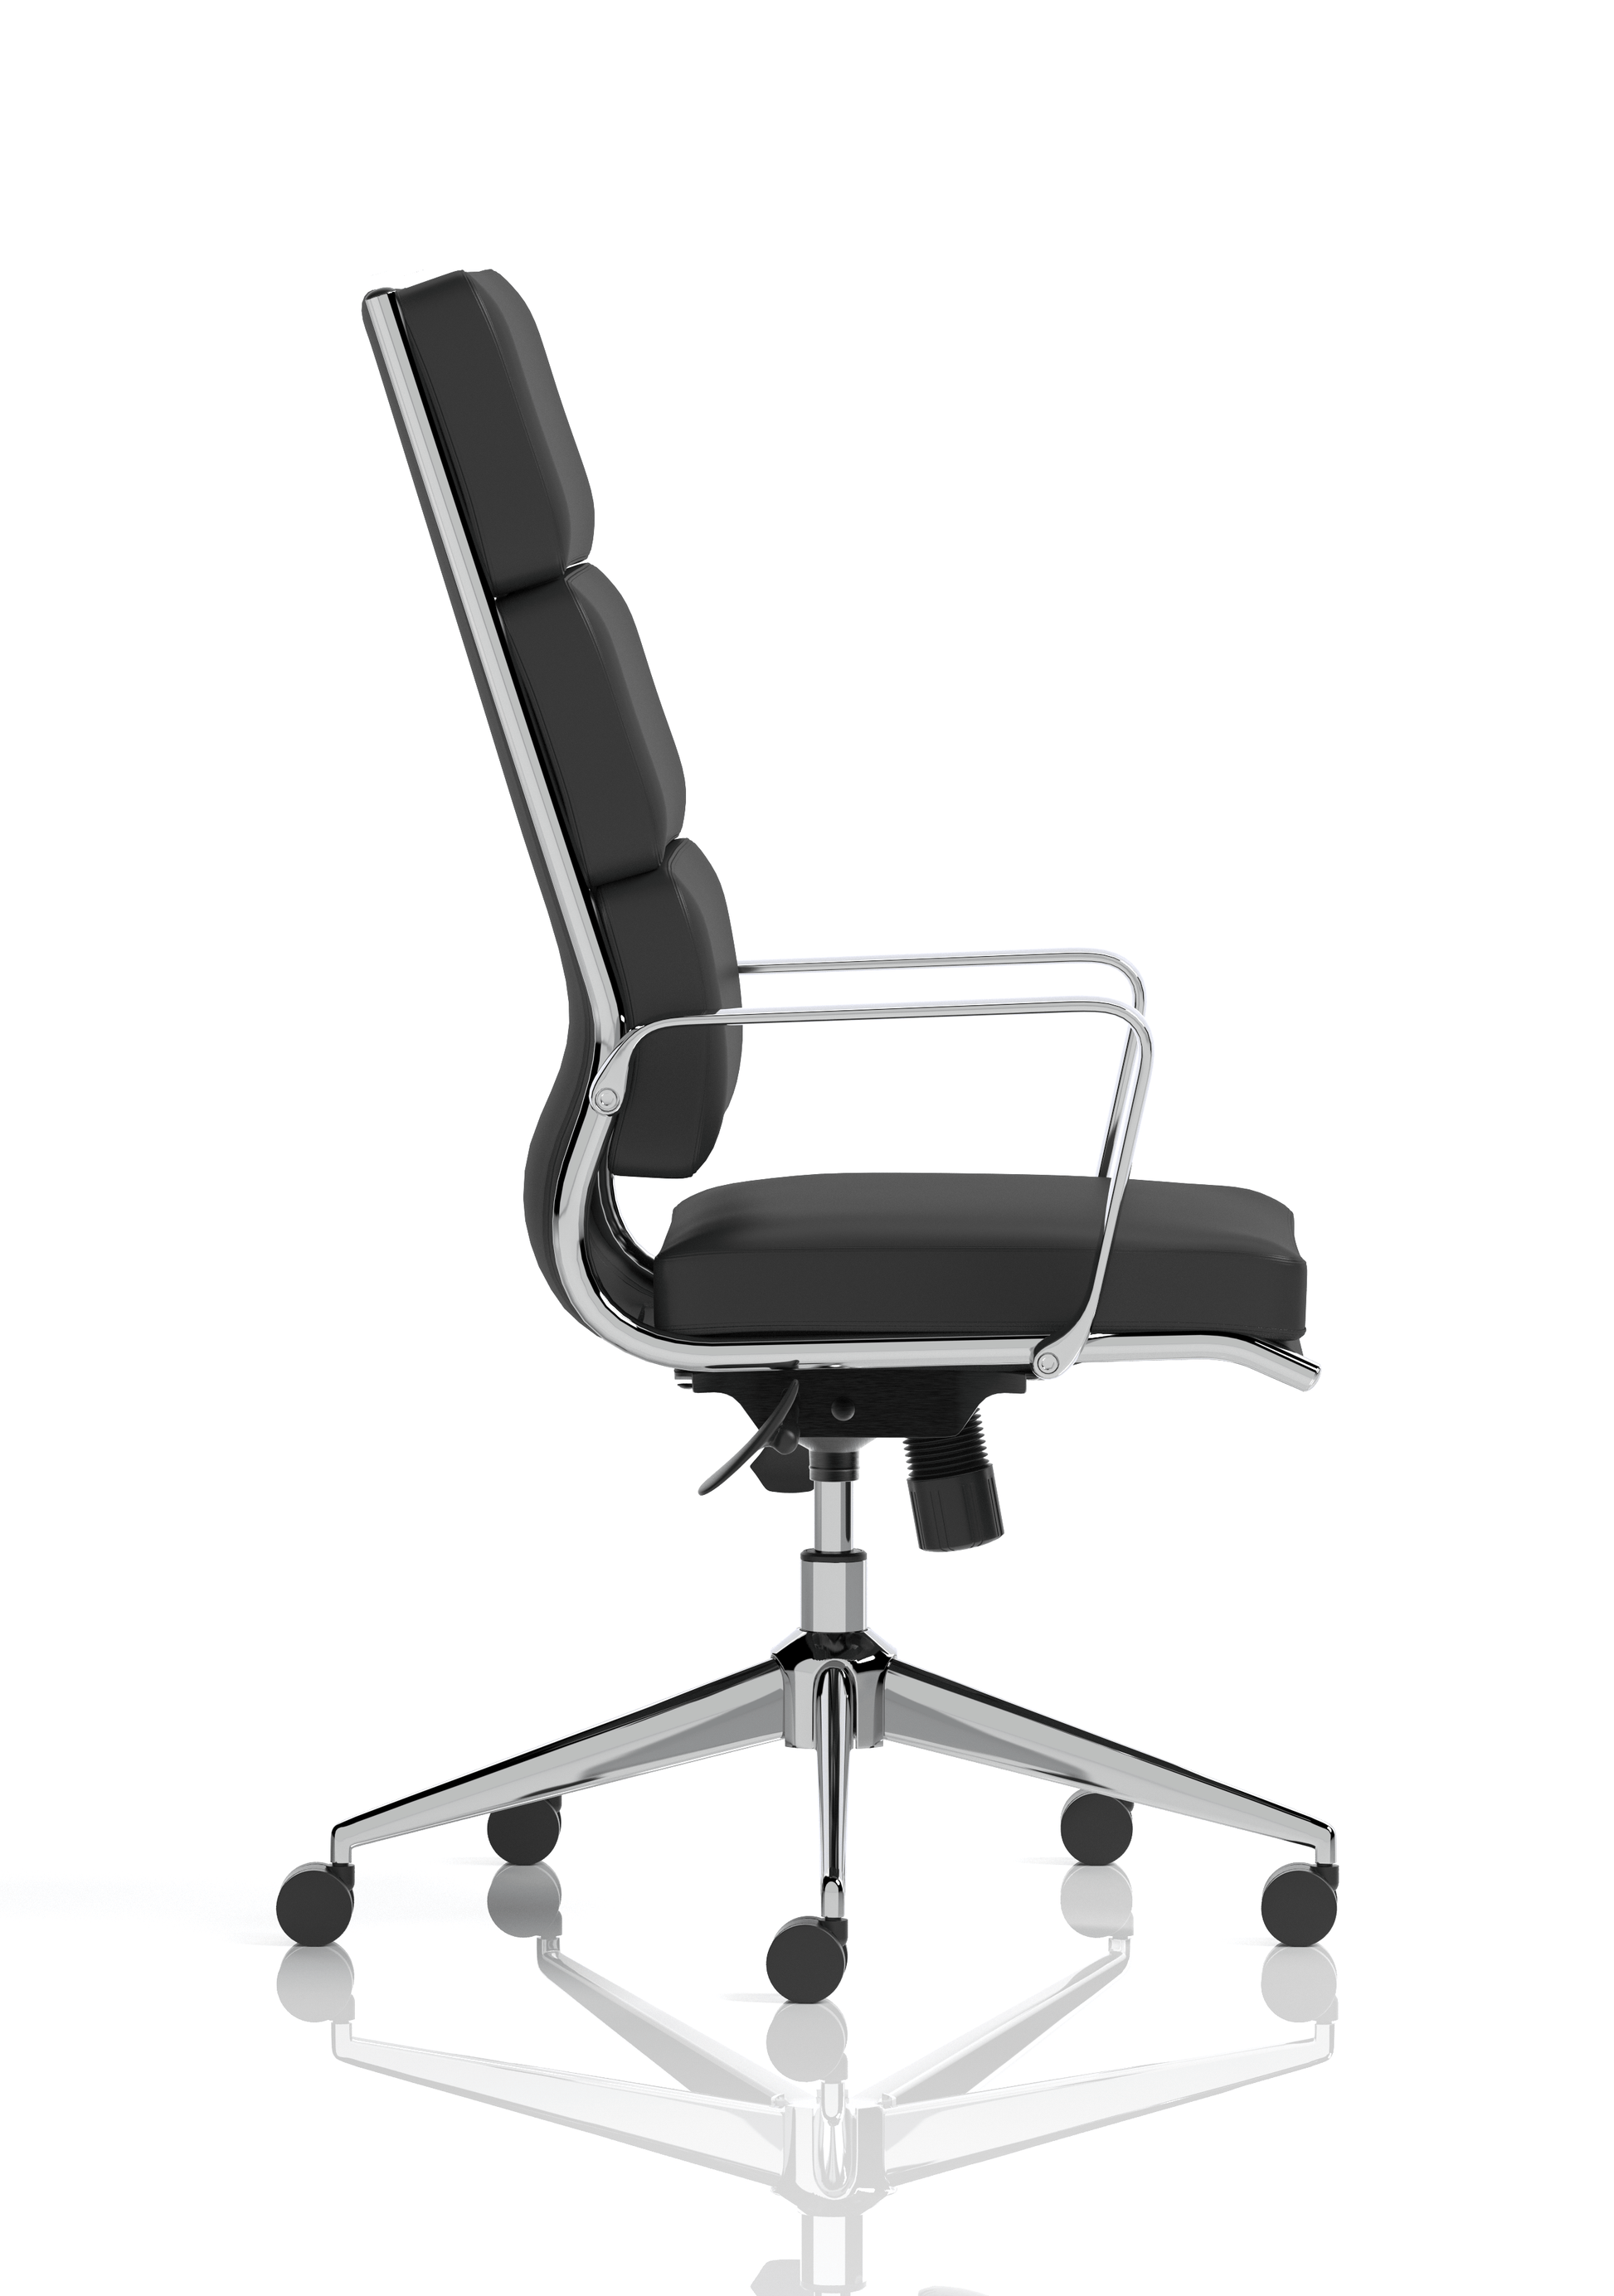 Savoy High Back Executive Black Leather Office Chair with Arms